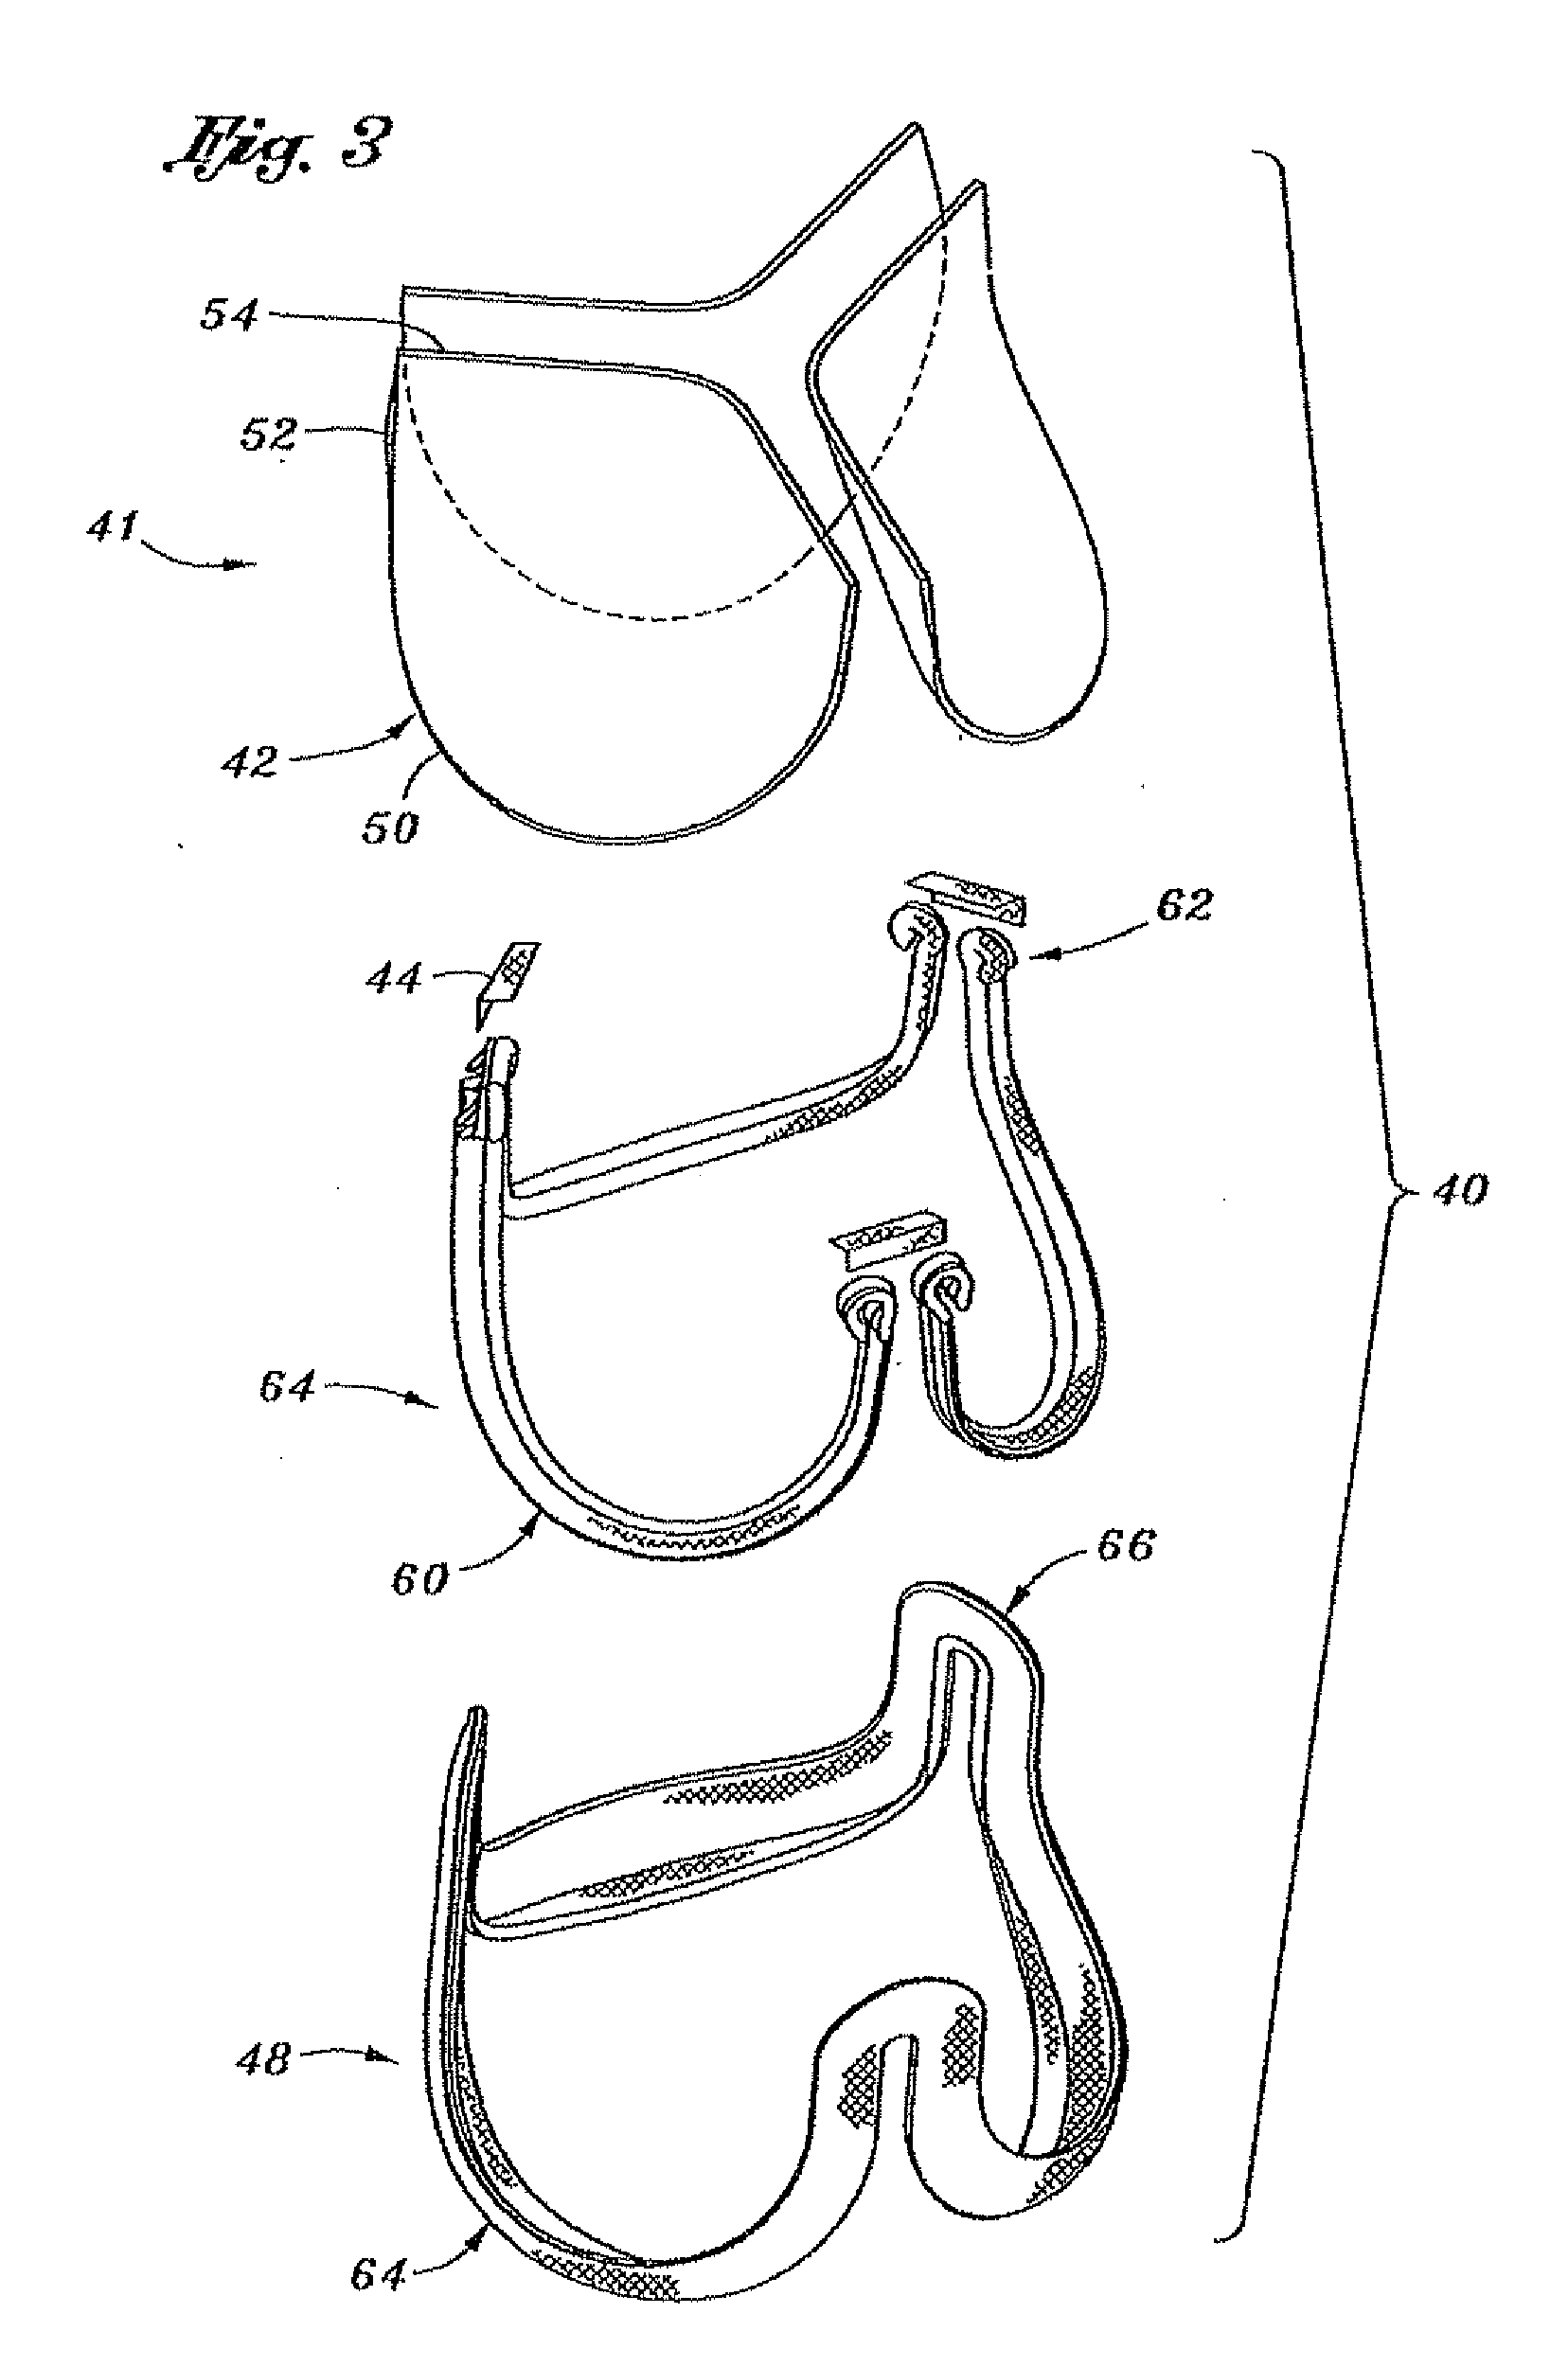 Flexible heart valve and associated connecting band